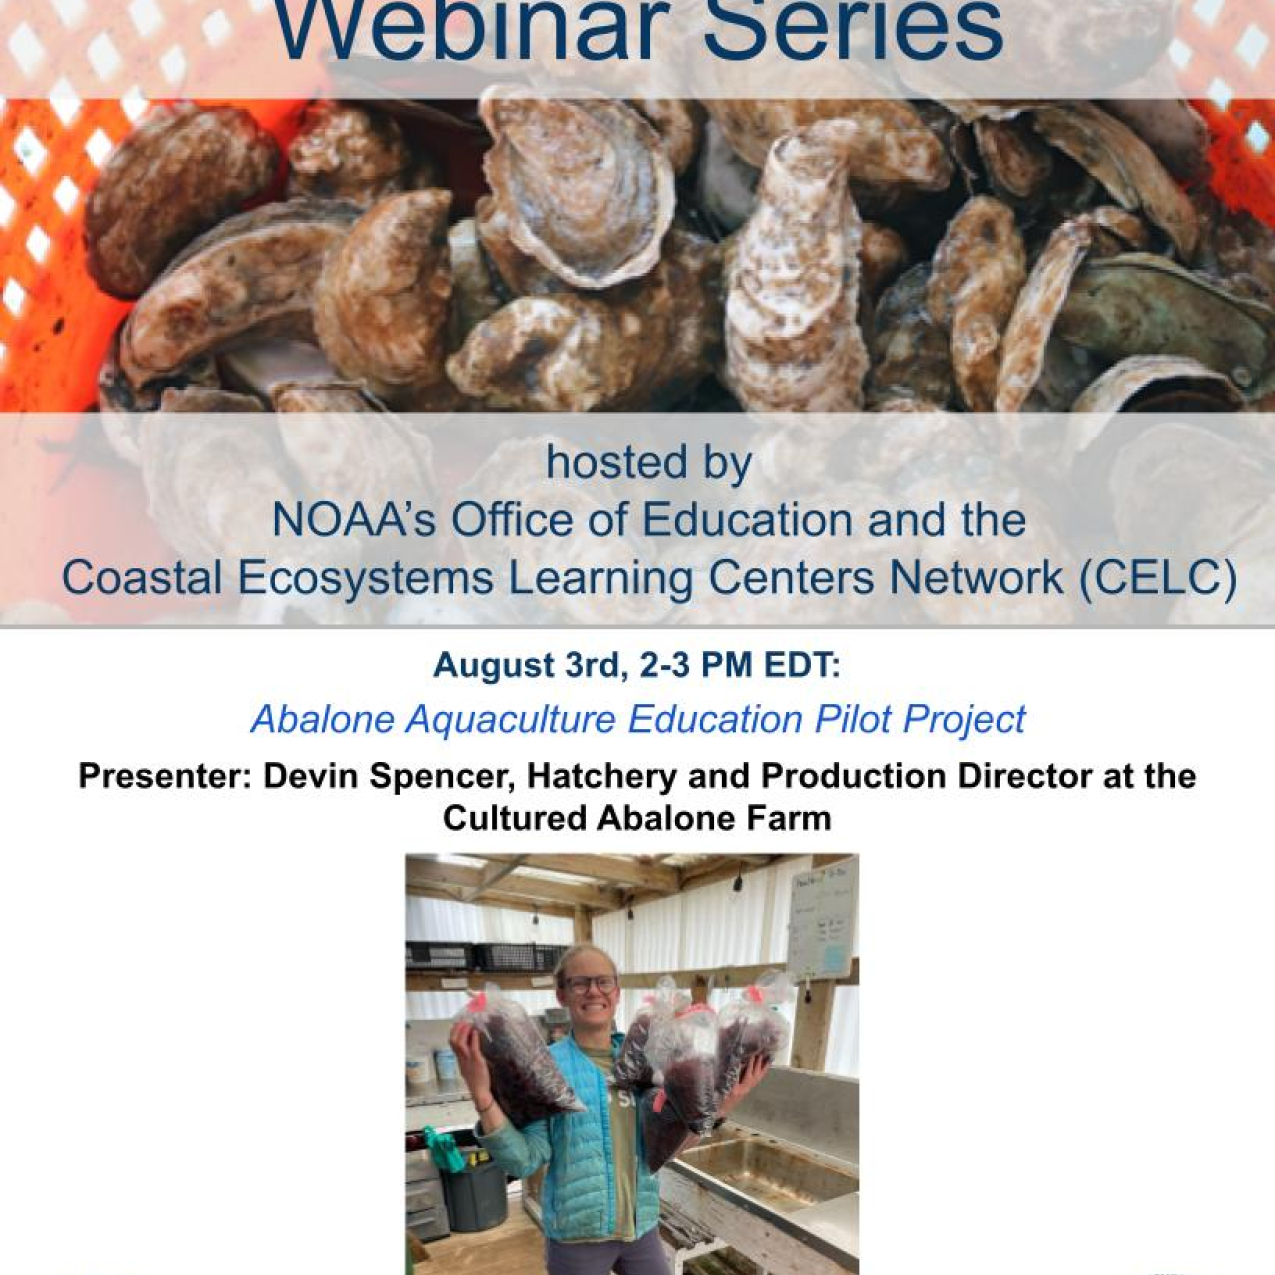 the flyer for the CELC Aquaculture Education Webinar Series, hosted by NOAA Education and the CELC network. Date: August 3, 2-3 PM EDT. Title: Abalone Aquaculture Education Pilot Project. Presenter: Devin Spencer, Hatchery and Production Director at the Cultured Abalone Farm. Picture is of this woman holding bags of abalone. She has blonde hair and glasses, brown boots, and a blue jacket. There is also a background image of oysters in a red bucket.